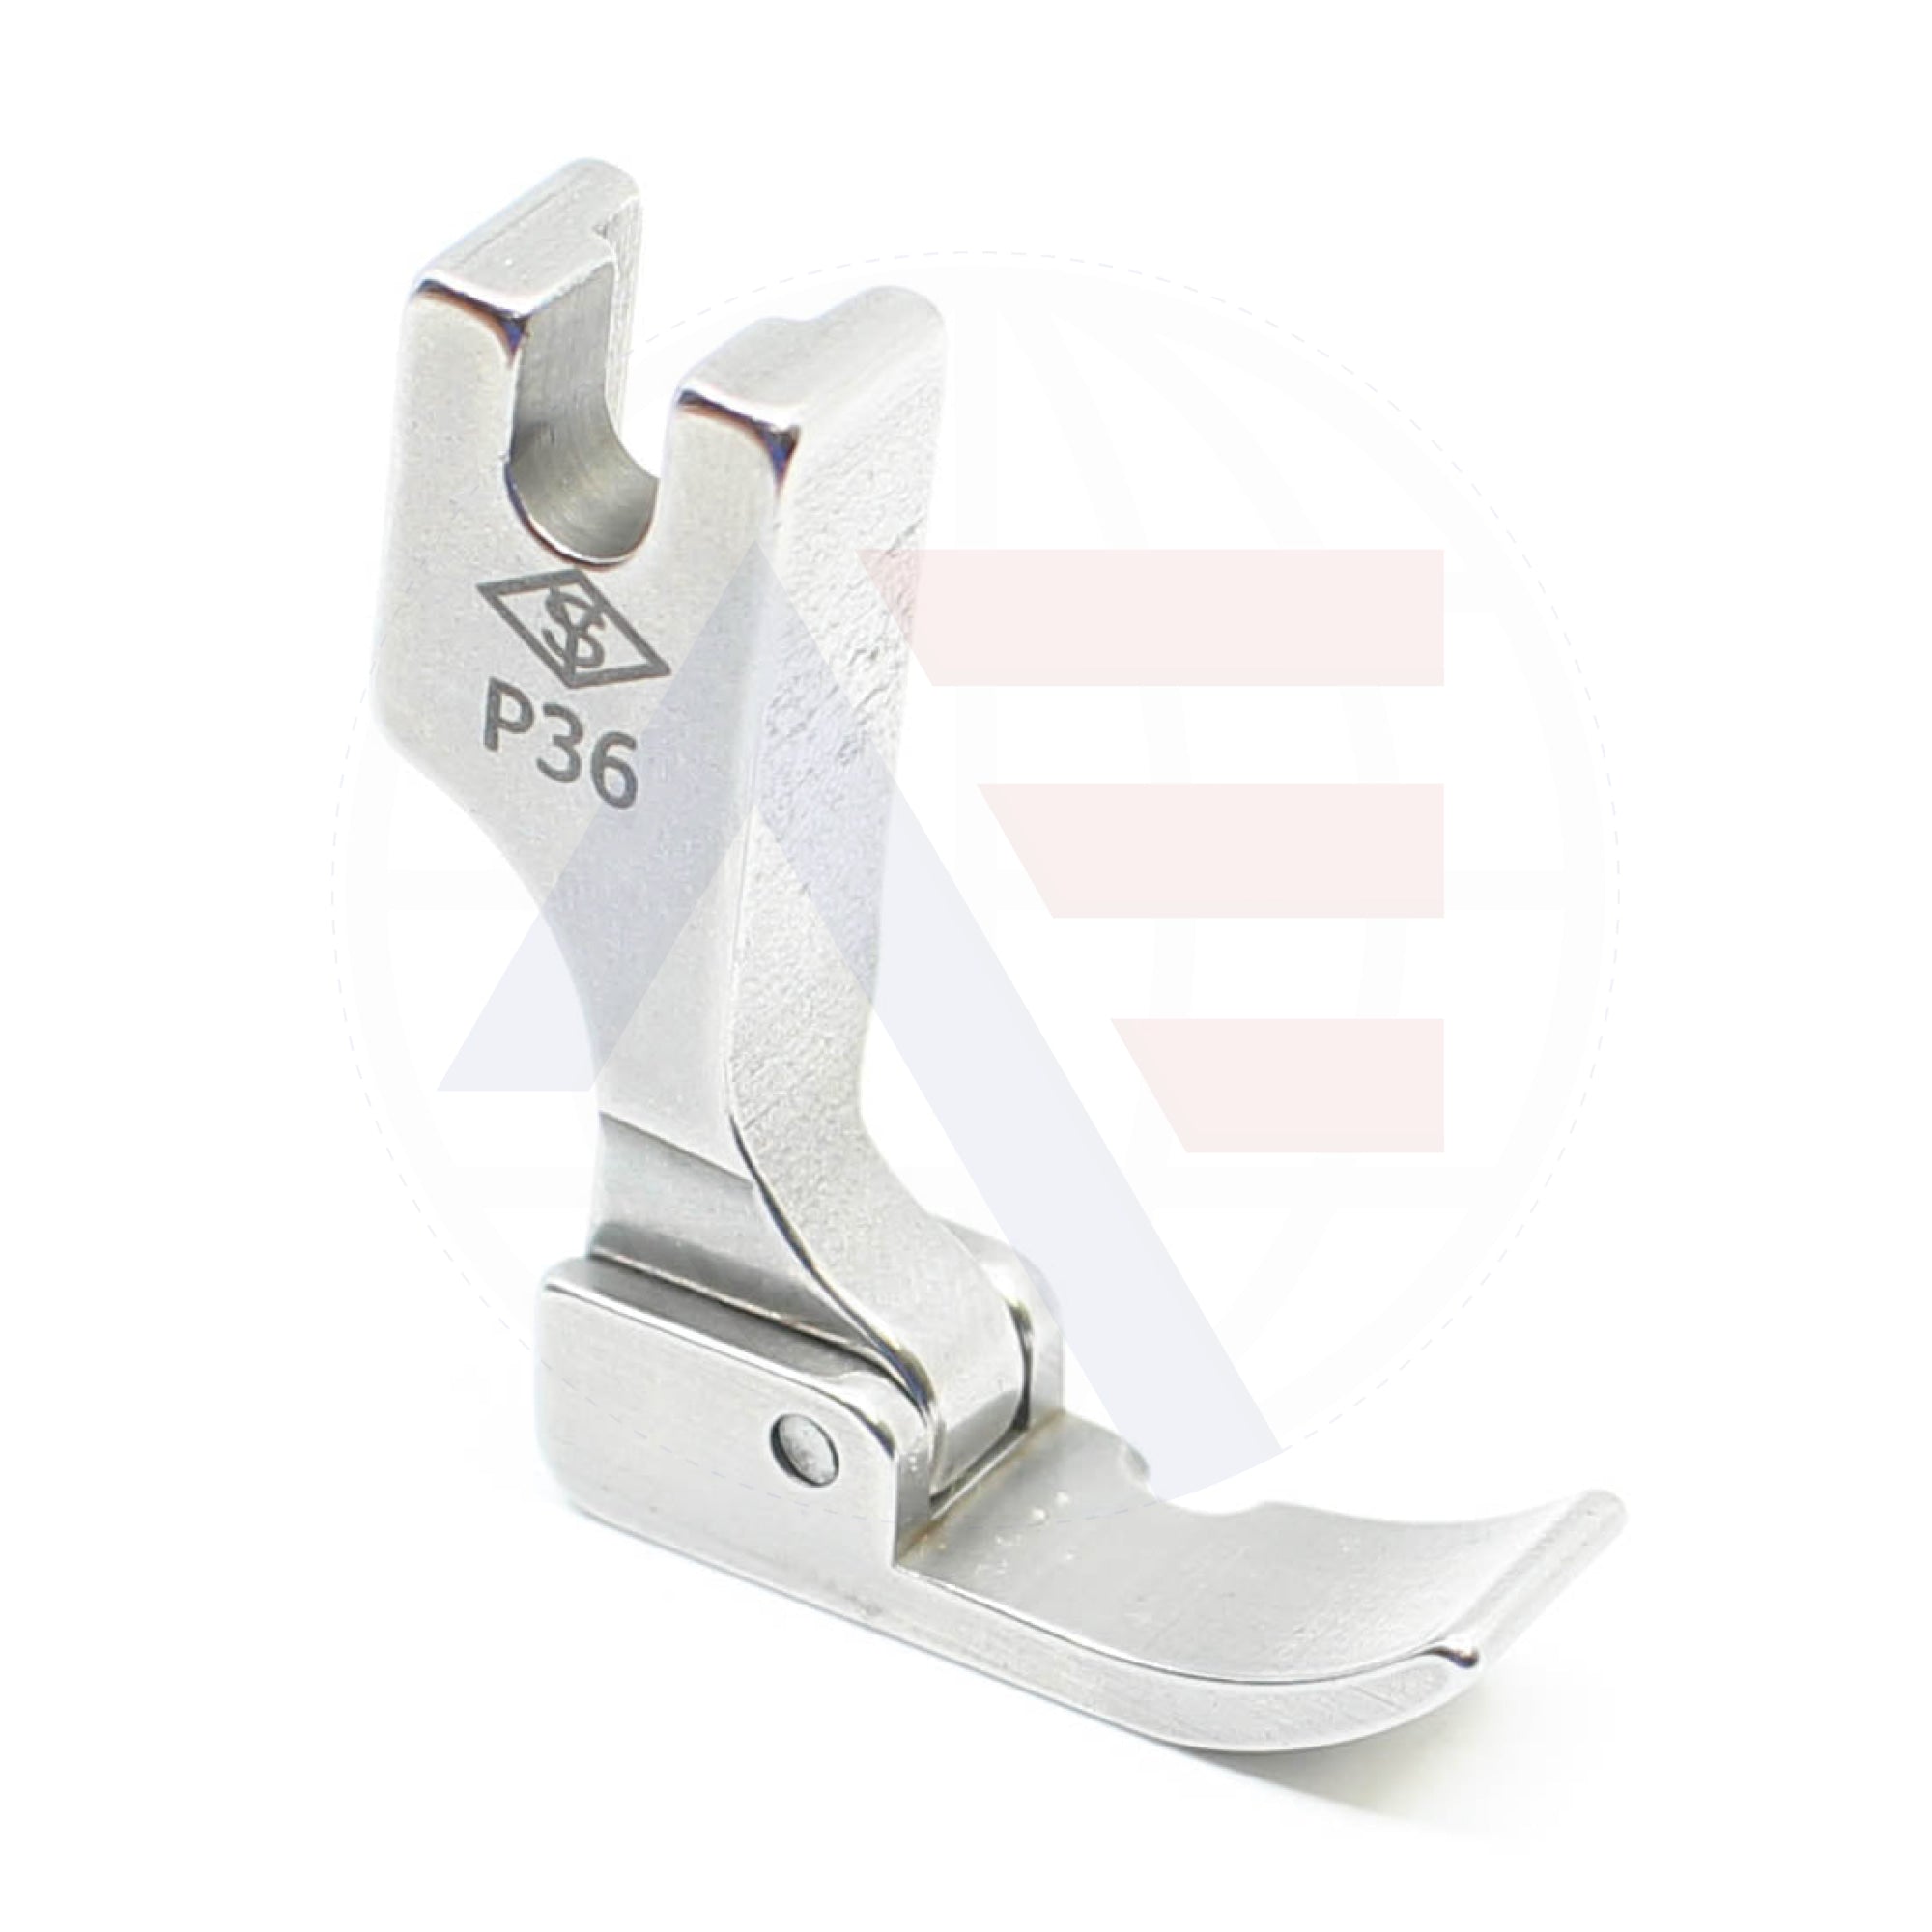 P36 Zip Foot Sewing Machine Spare Parts